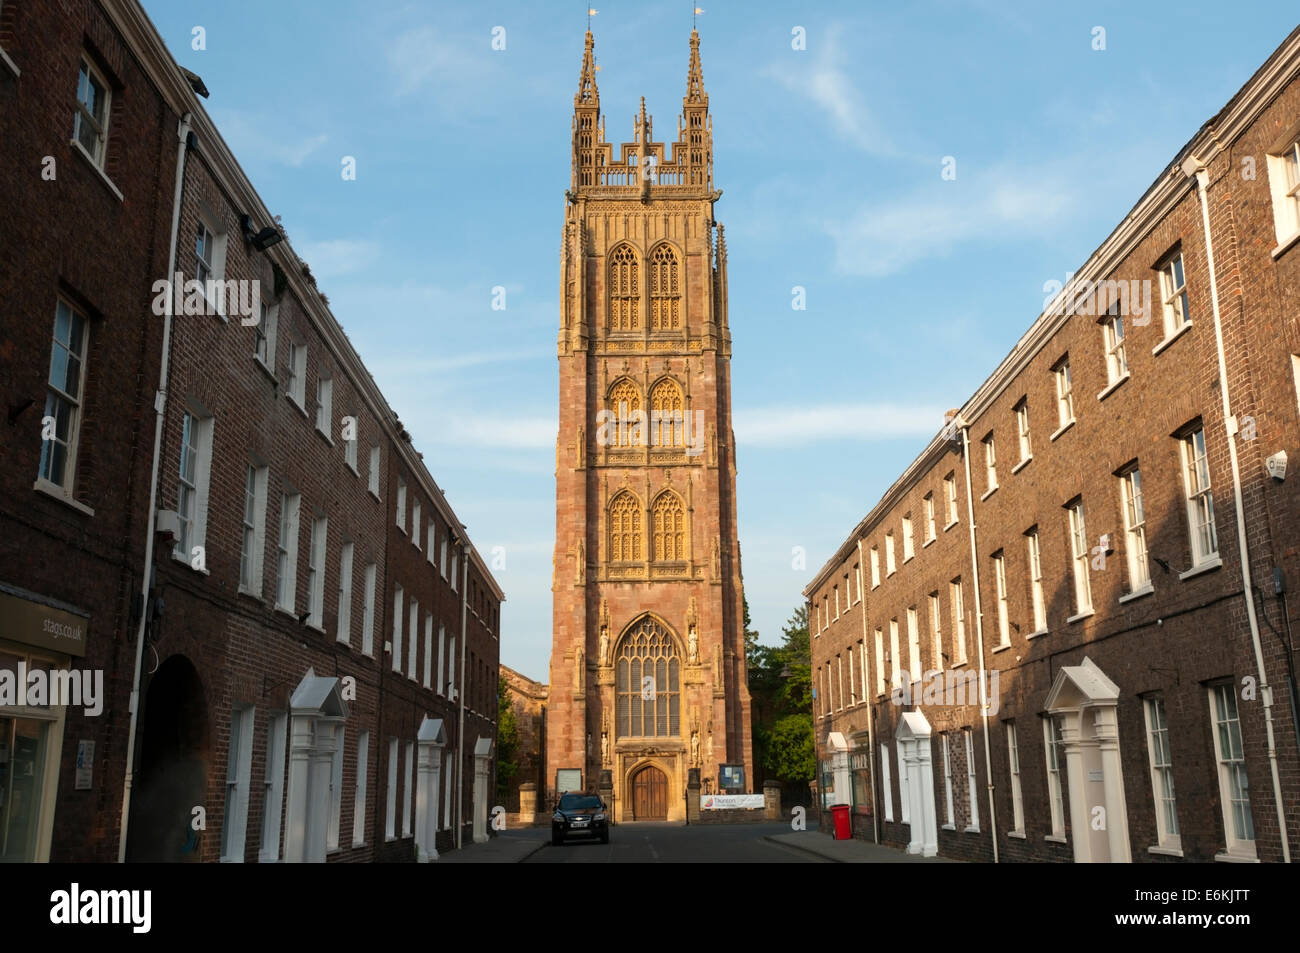 Early evening sunlight striking the tower of St Mary Magdalen church in Taunton, seen along Hammet Street. Stock Photo